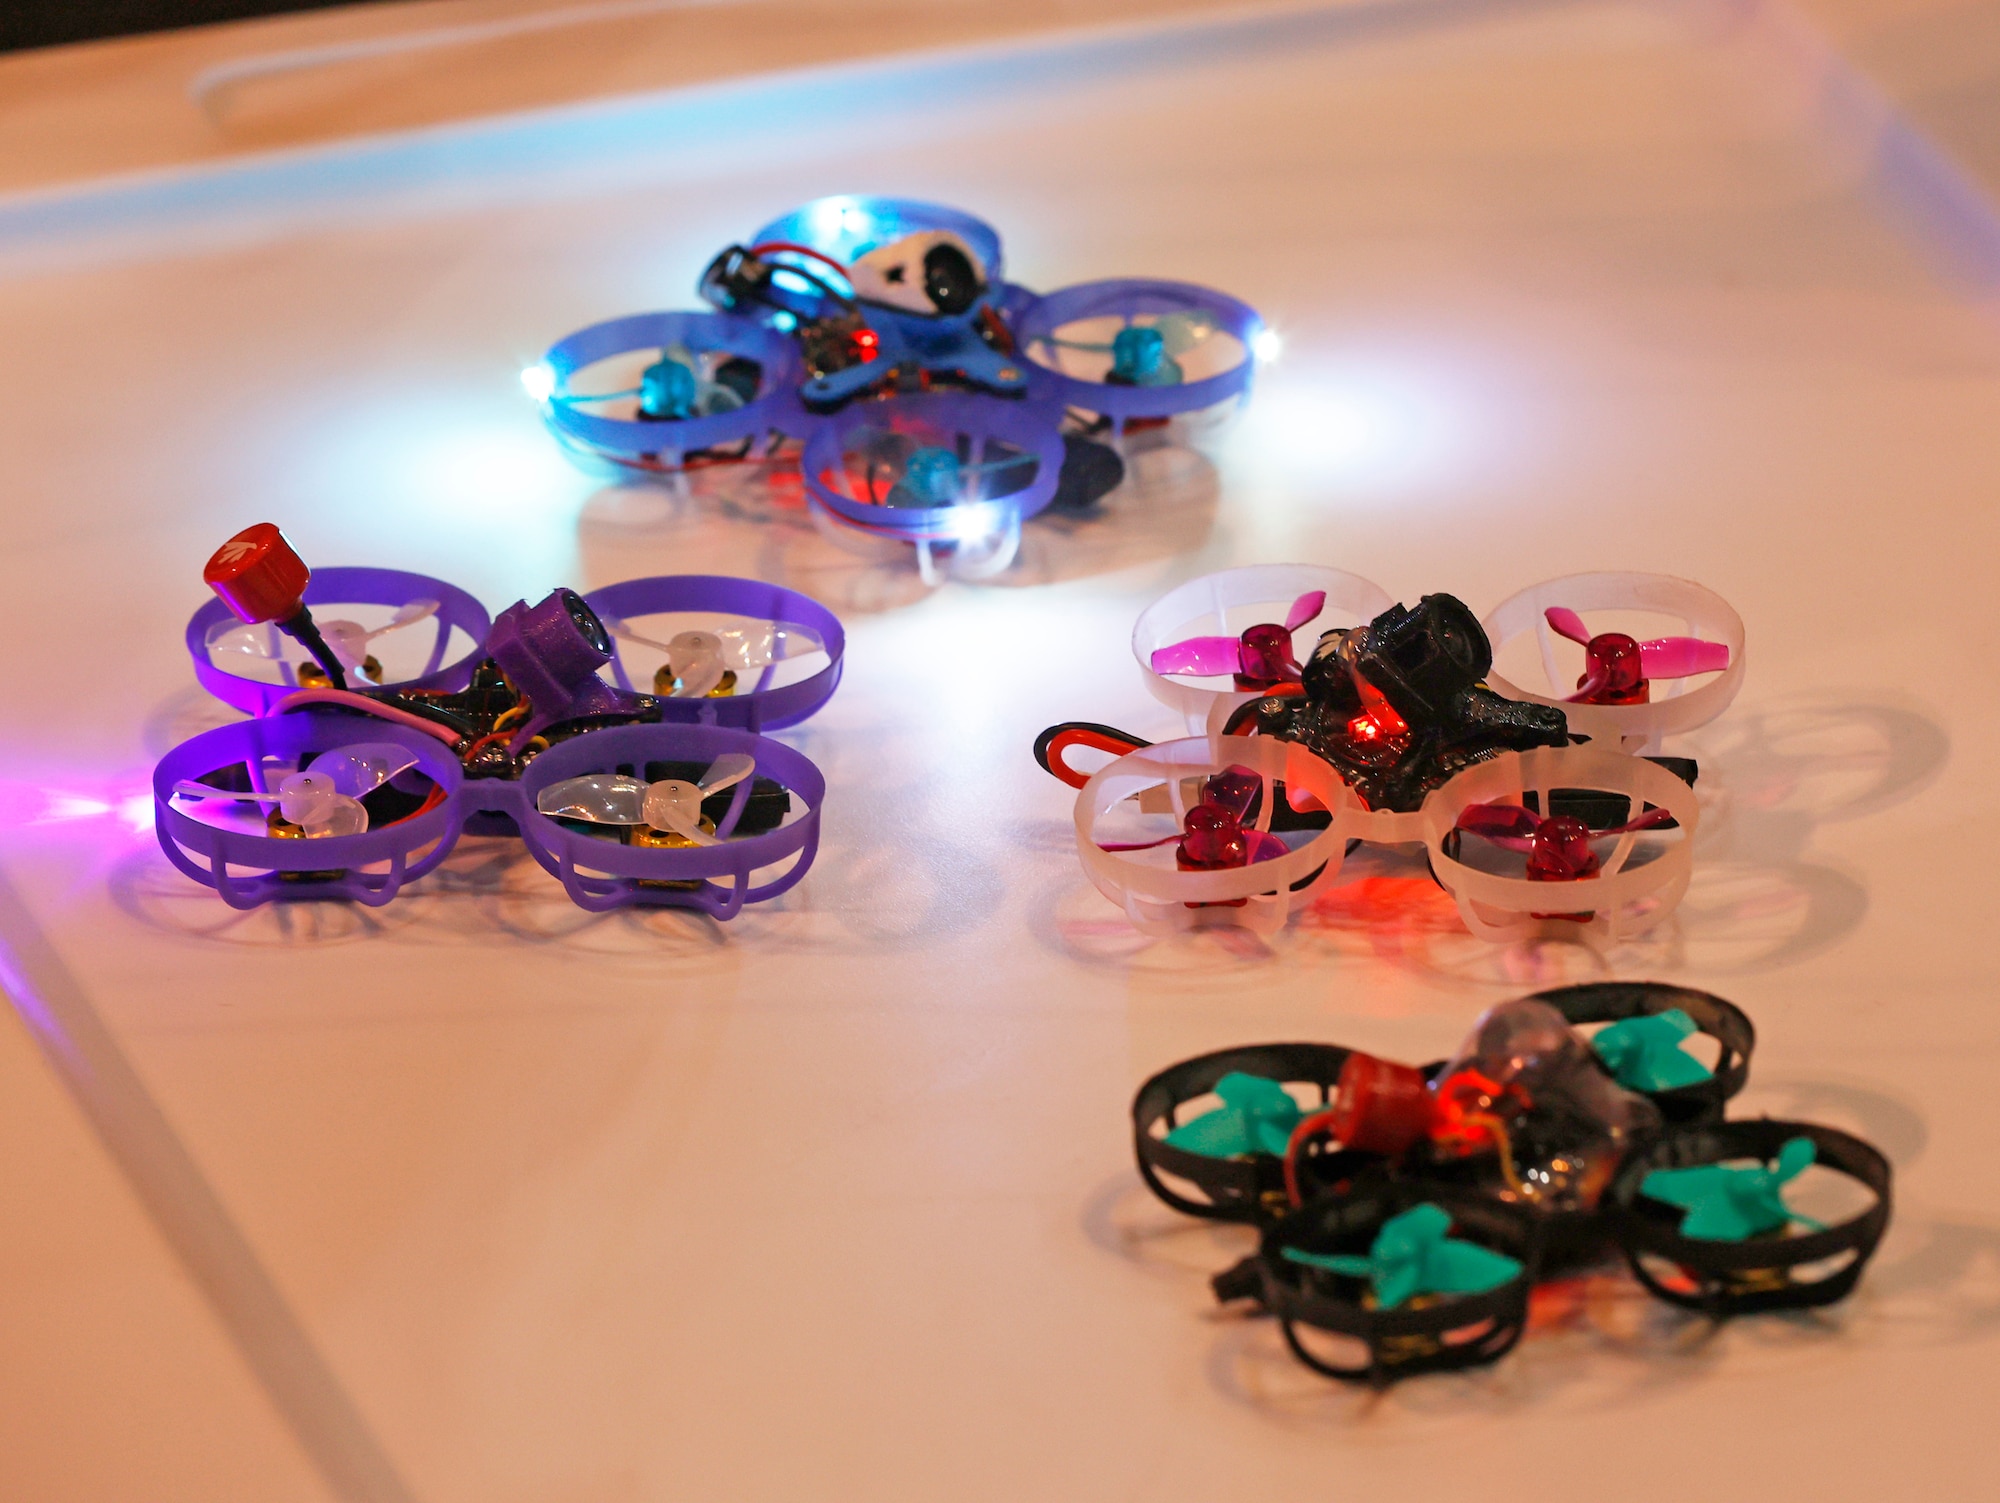 Image of 4 micro drones on a table. One is blue, one is purple, one is red nd the other is green and black. They each have four propellers.